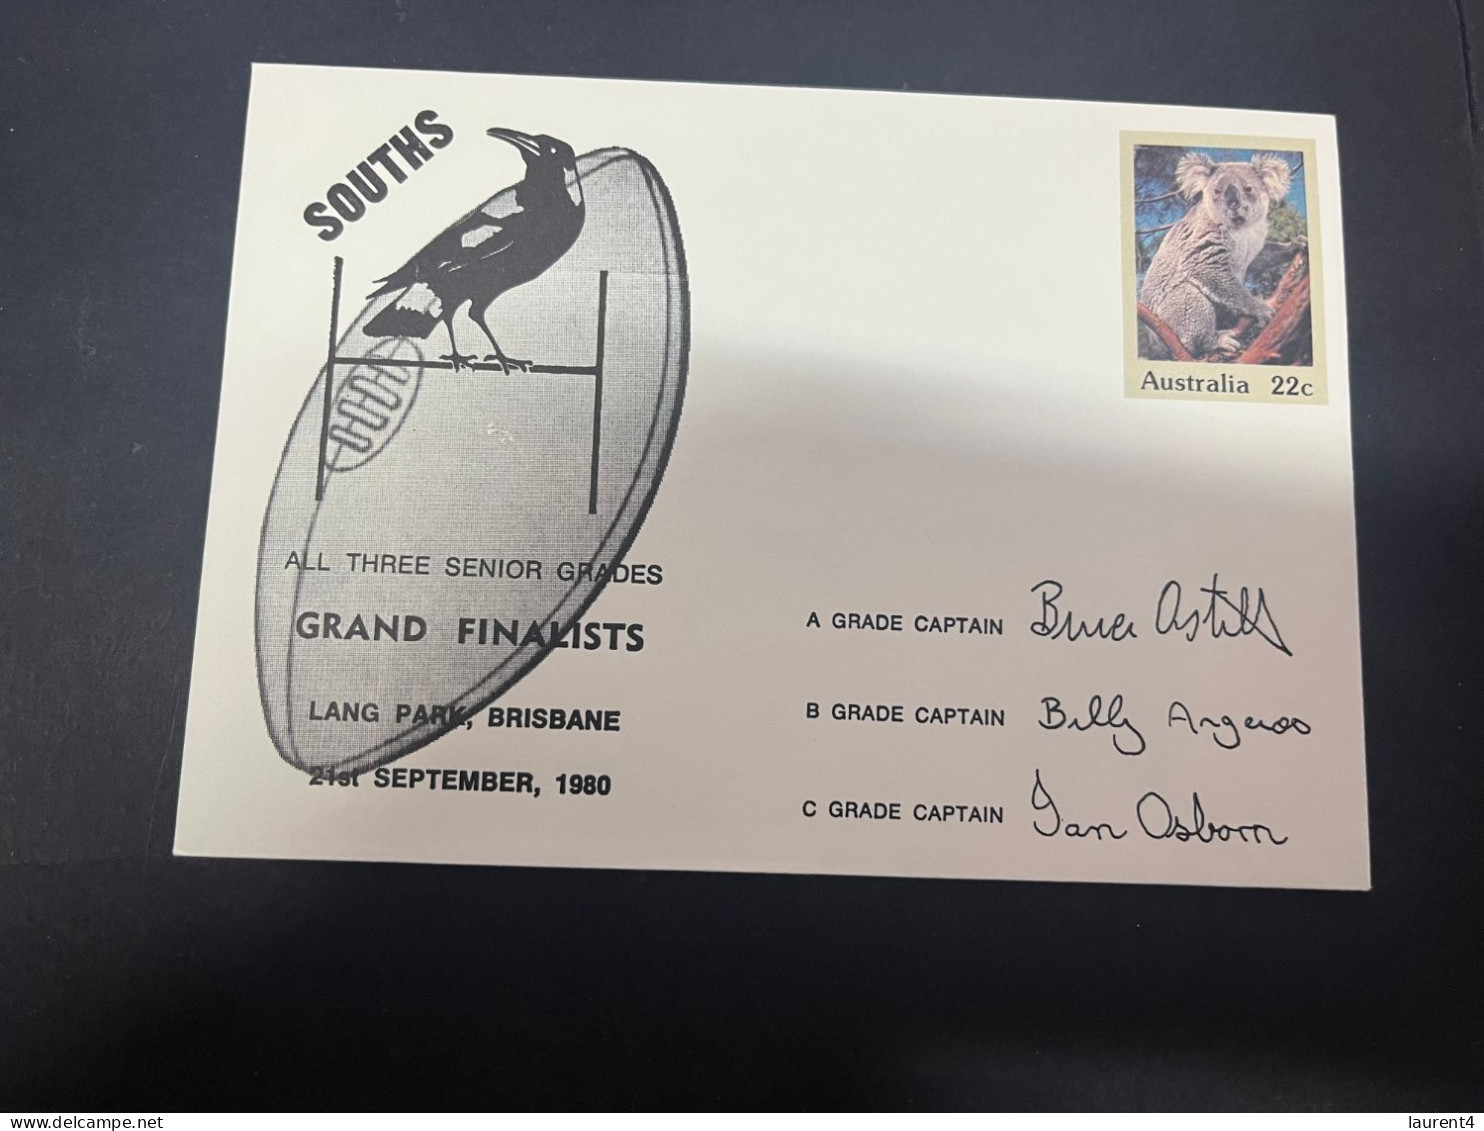 1-5-2023 (3 Z 39) Australia FDC (1 Covers) 1980 - OZ Football - South (magpies) Grand Finalists (signed - Koala) - Premiers Jours (FDC)